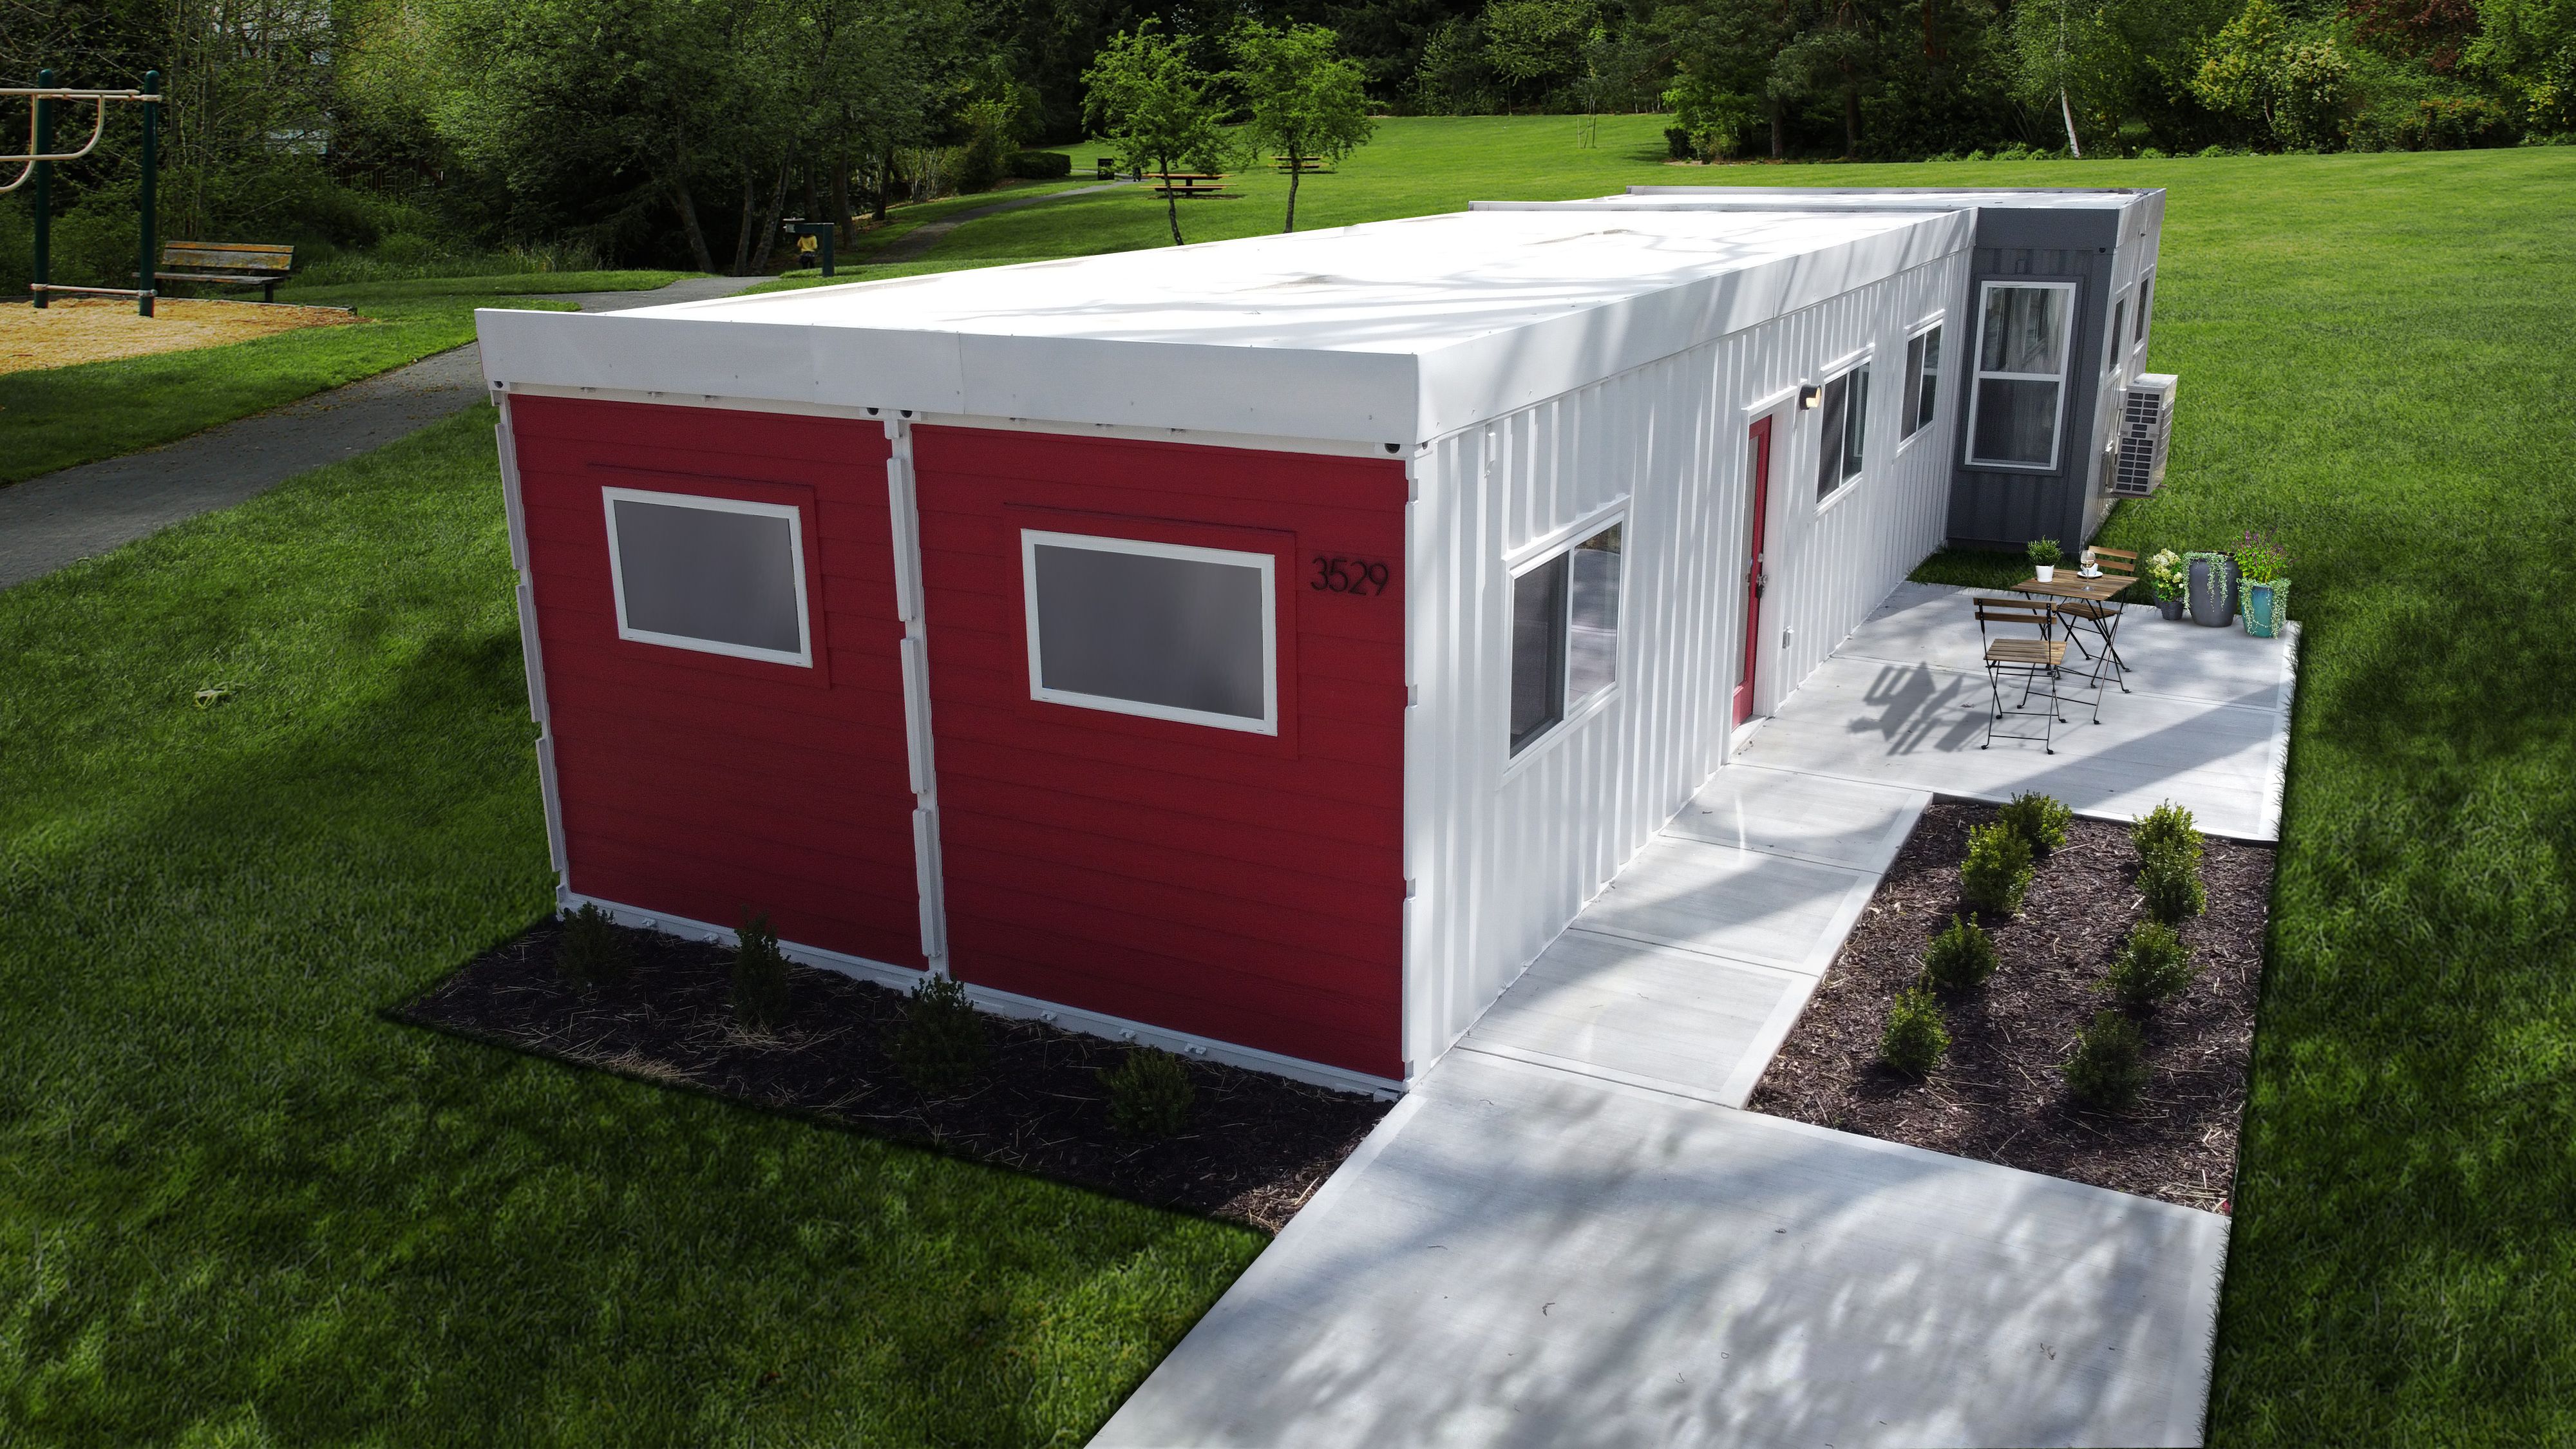 Create a Shipping Container Tiny House in 8 Easy Steps